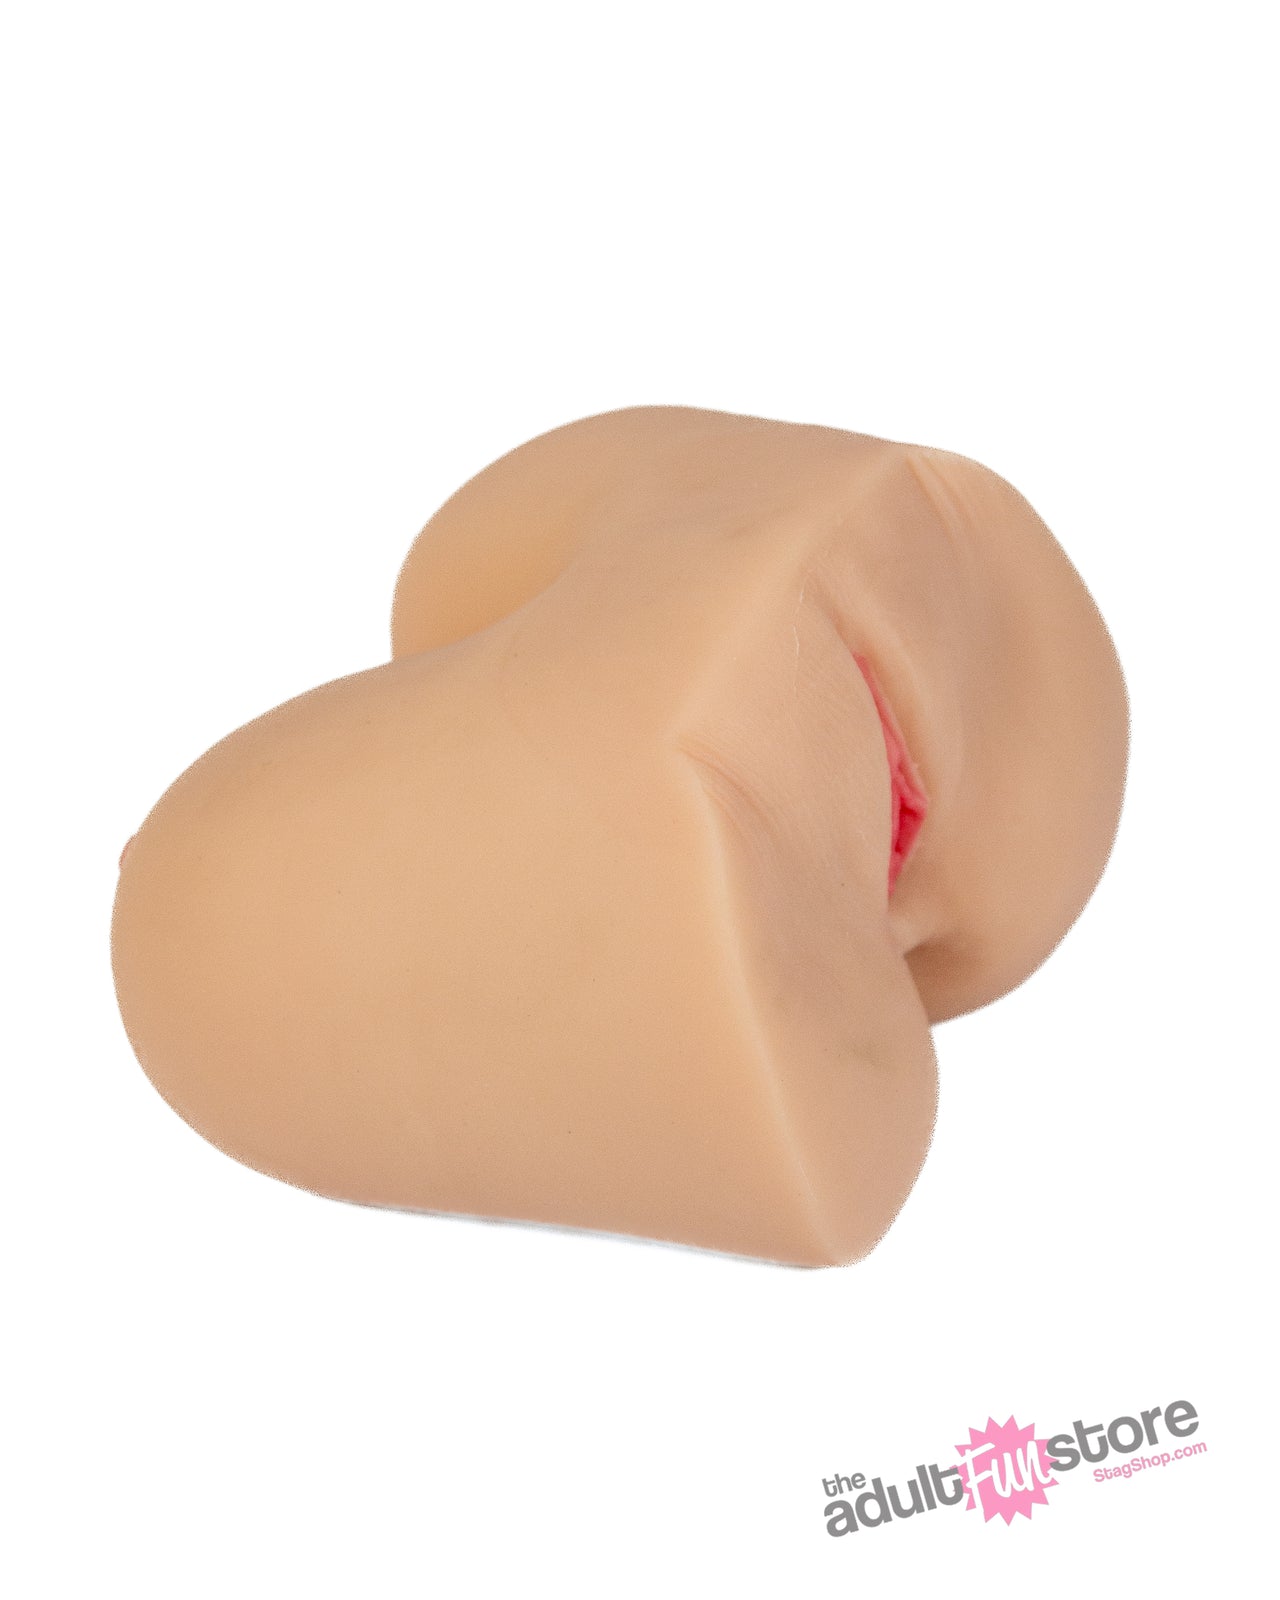 Cousins Group - Jessa Rhodes Titwoman Double Sided Stroker - Beige - Stag Shop